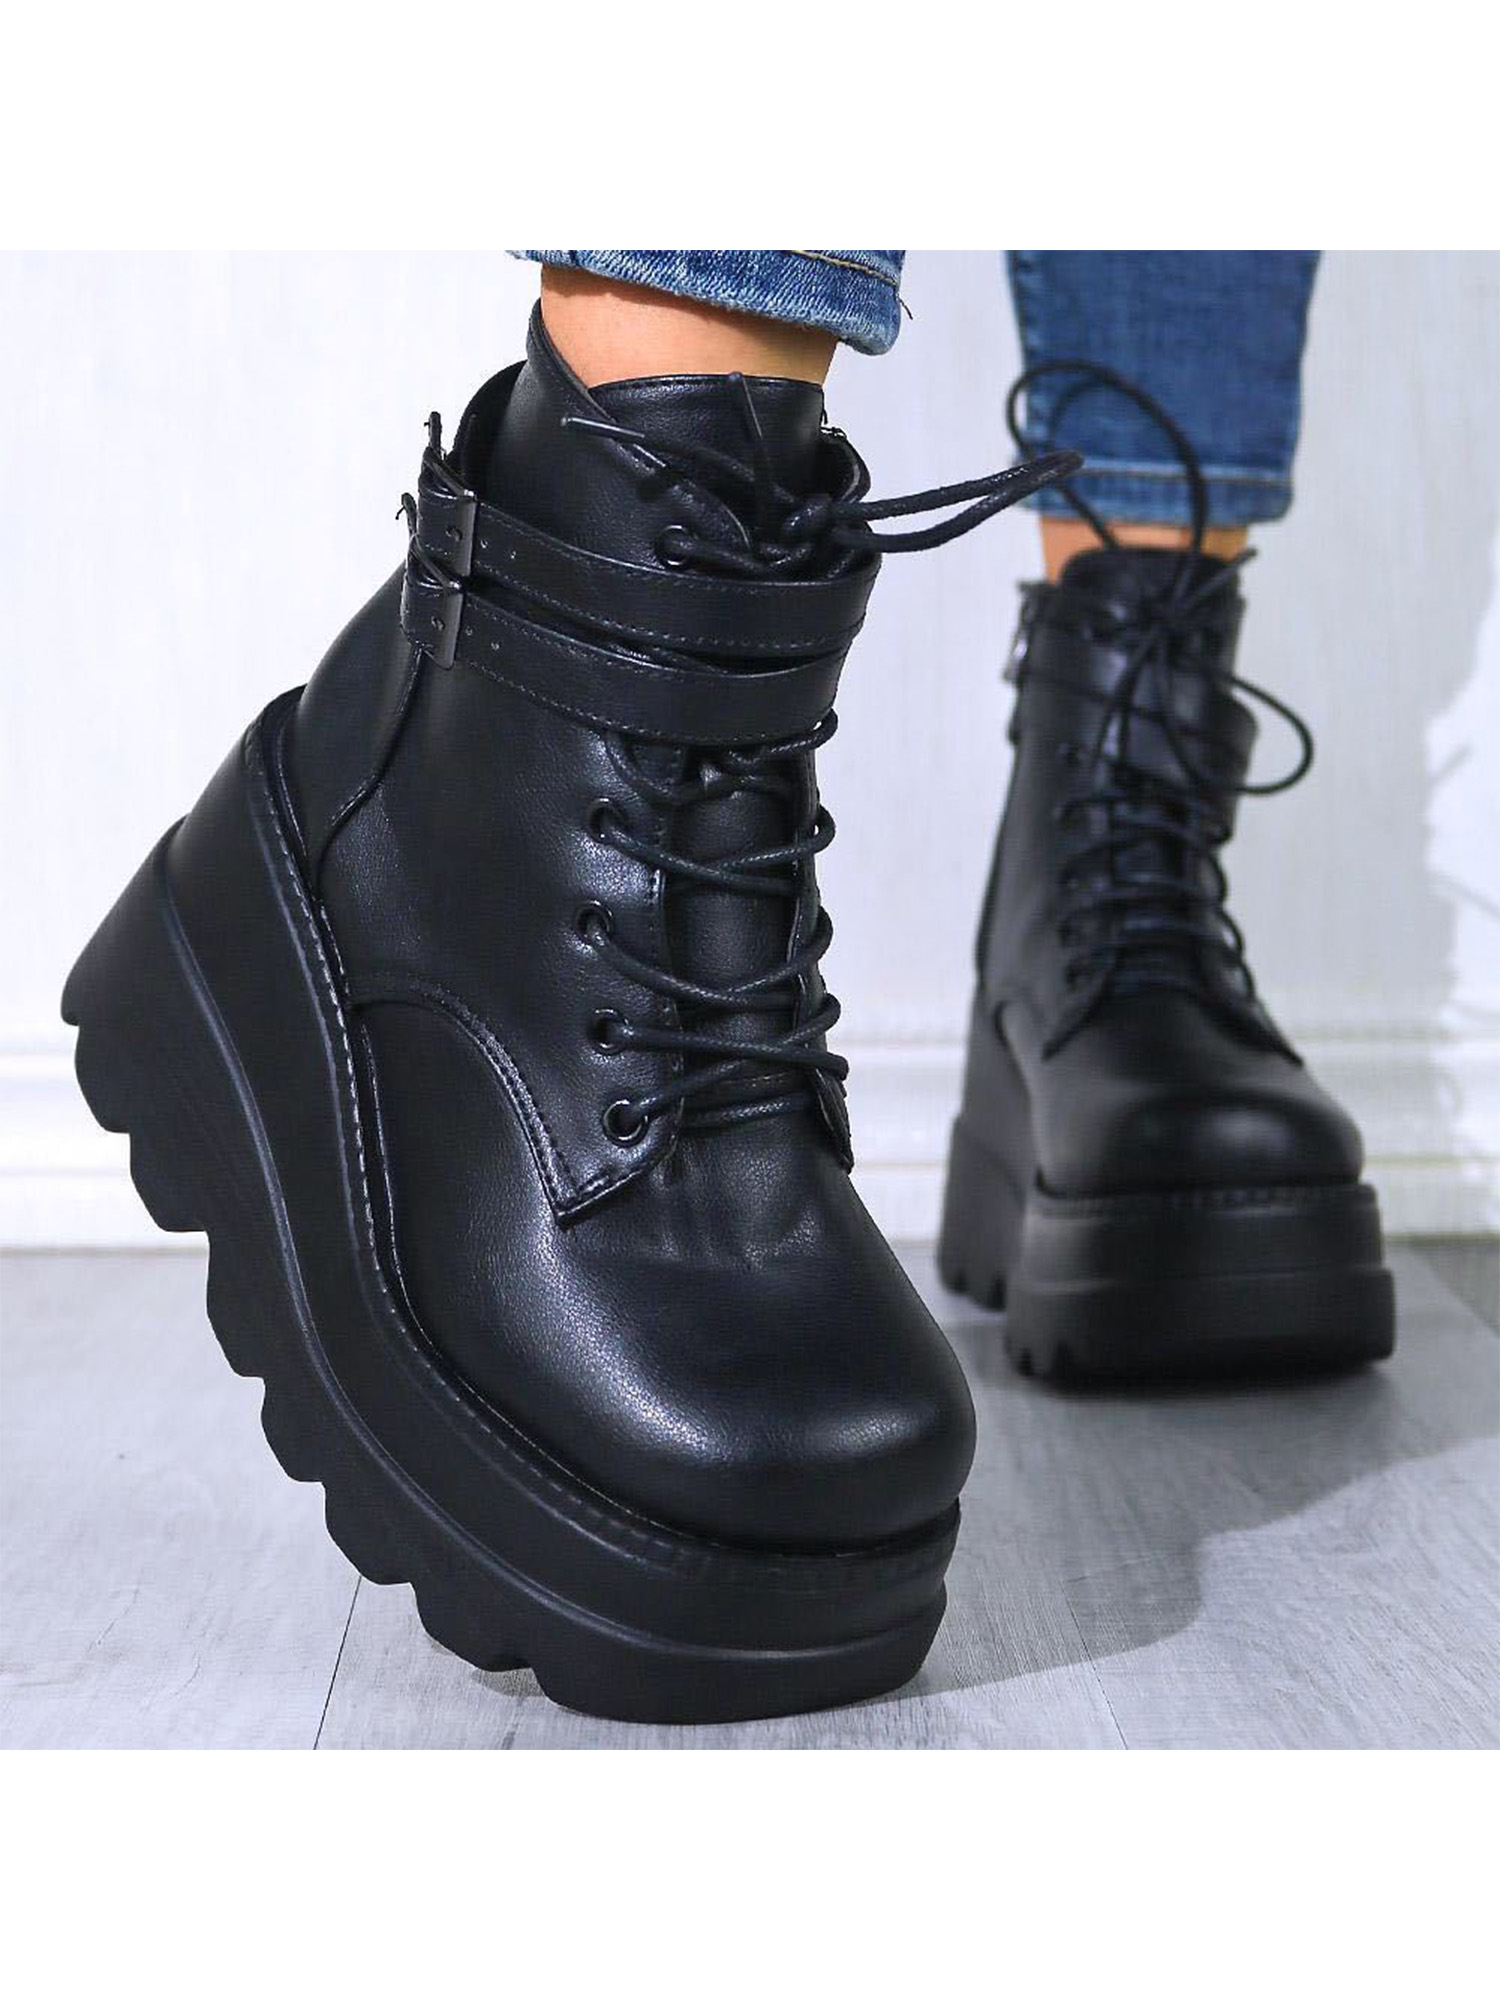 Avamo Womens Shoes Platform Shoes Ankle Boots High Heel Shoes Round Toe Casual Shoes - image 4 of 4